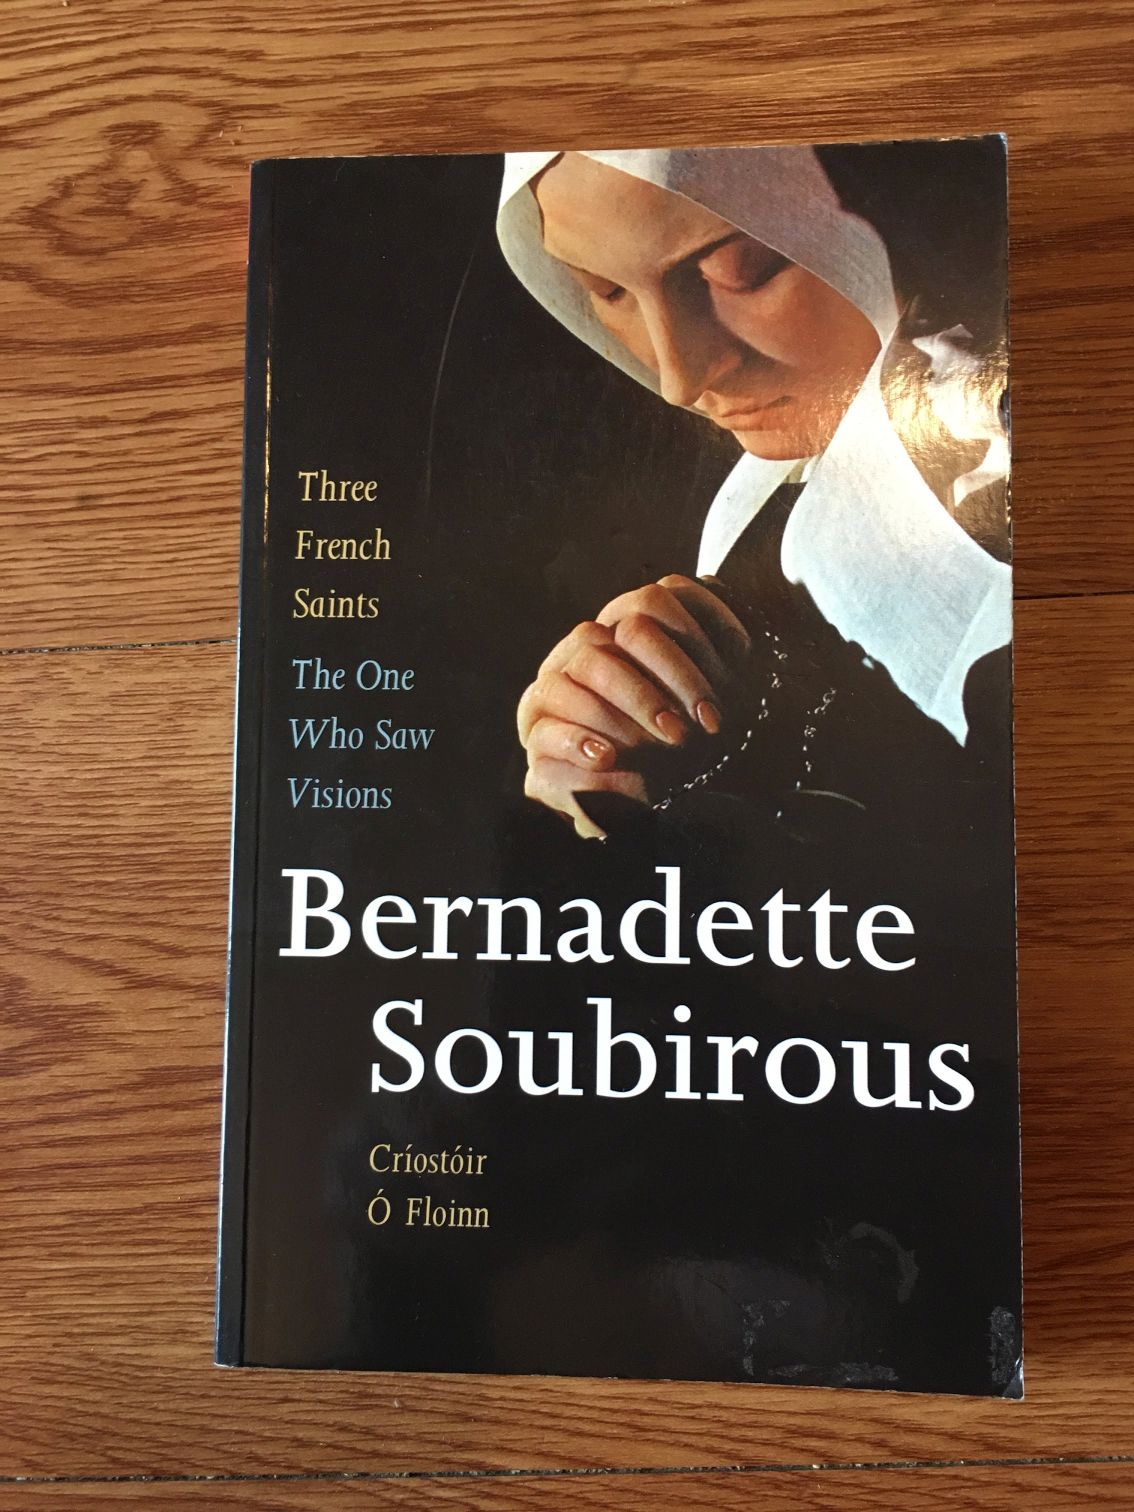 The One Who Saw Visions, Three French Saints, - Bernadette